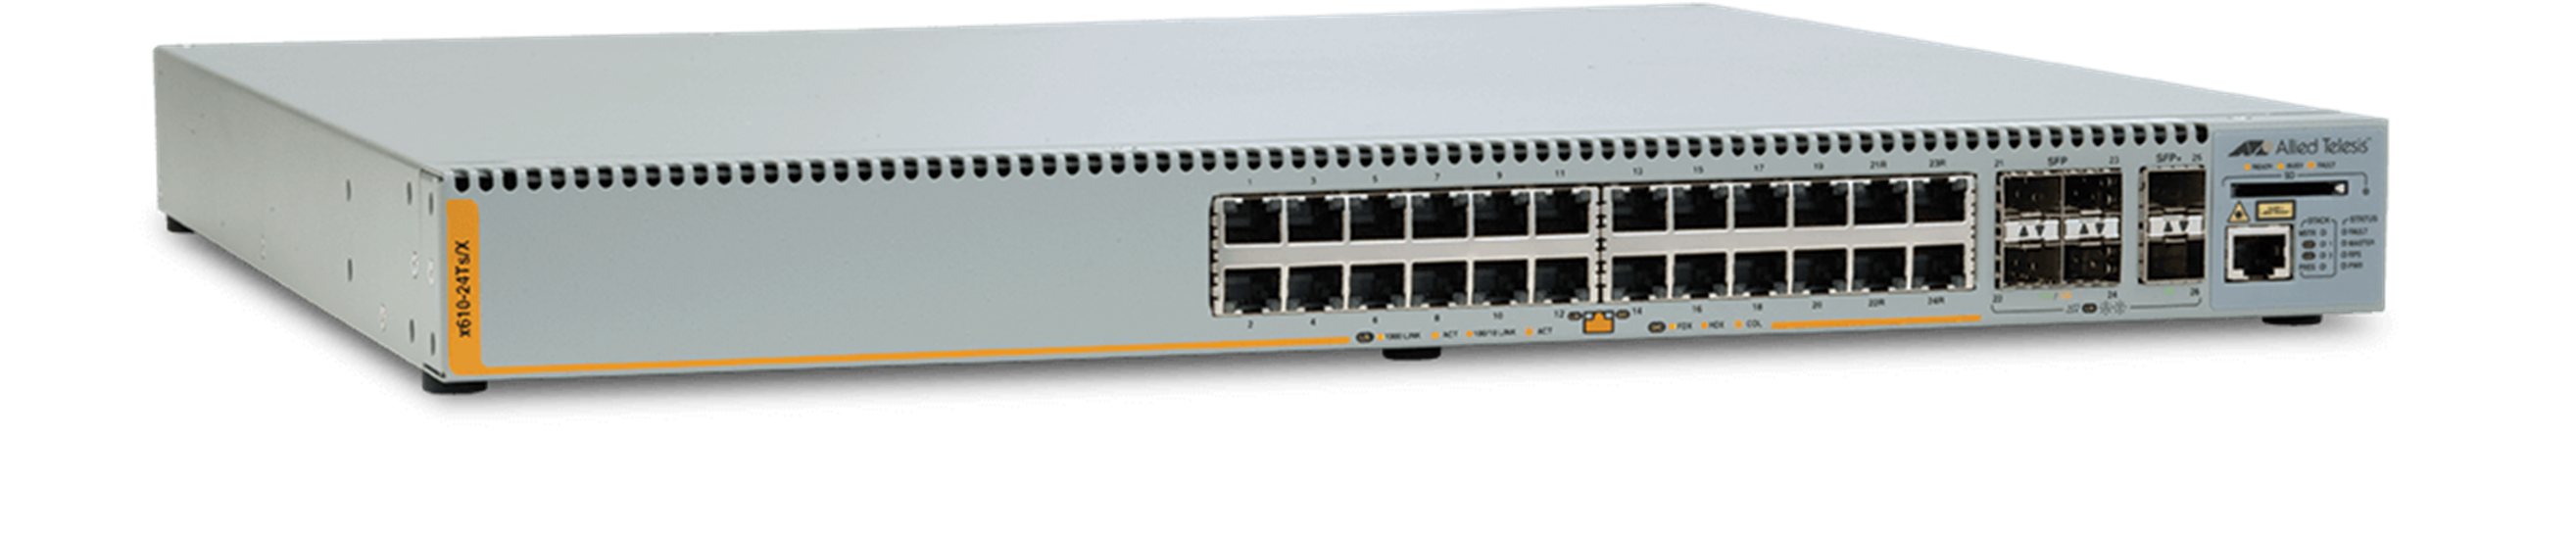 AT-x610 series - Advanced Gigabit layer 3 Stackable Switch